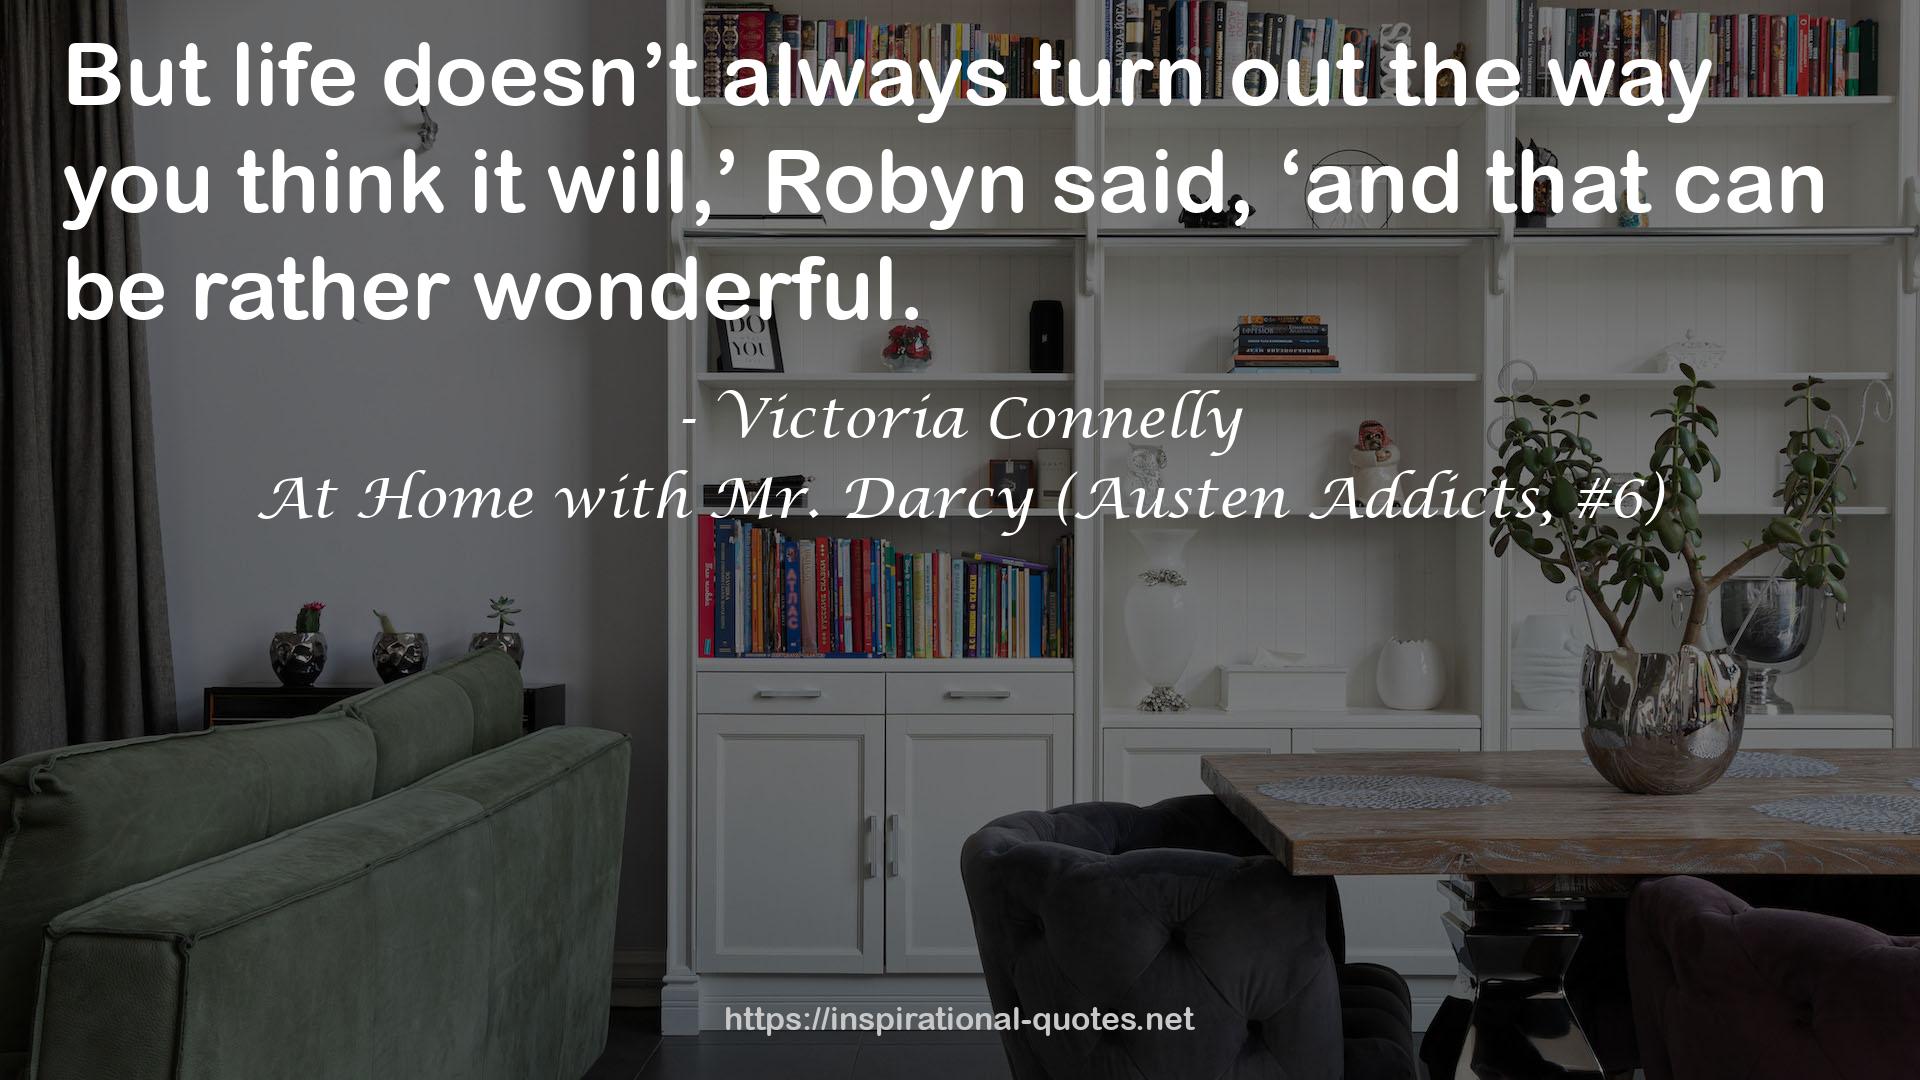 At Home with Mr. Darcy (Austen Addicts, #6) QUOTES